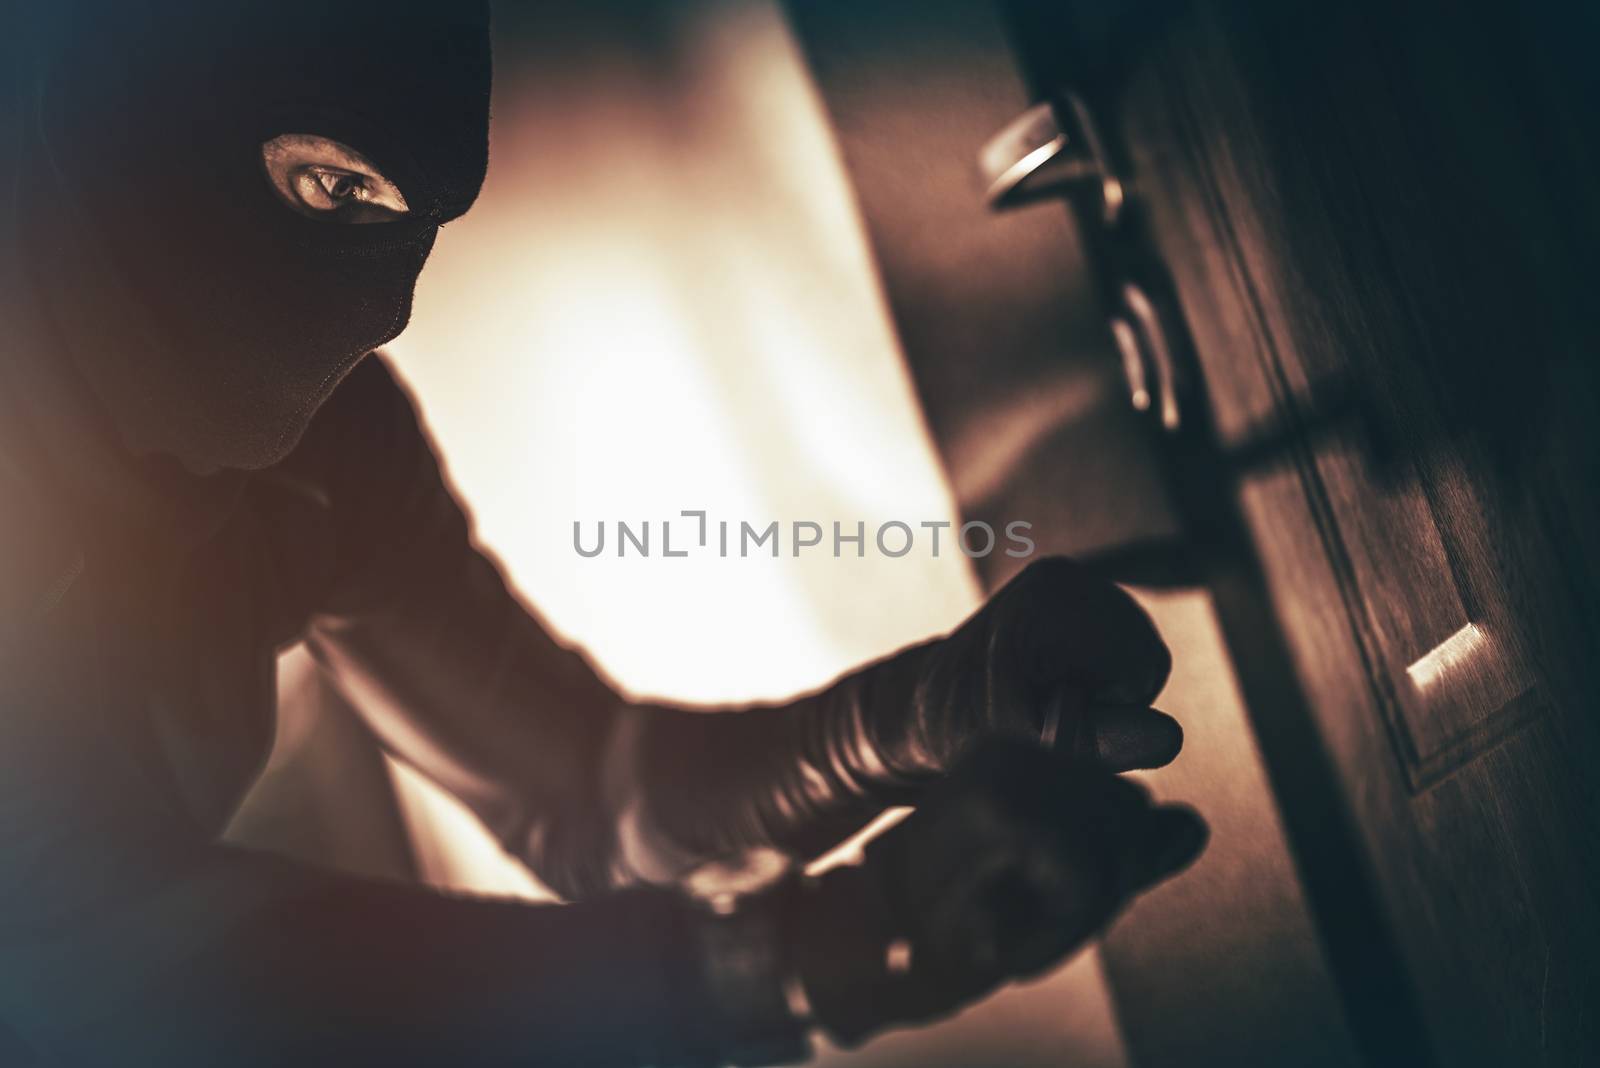 Caucasian House Burglar in Action. House Burglary Concept Photo. Home Safety Systems.